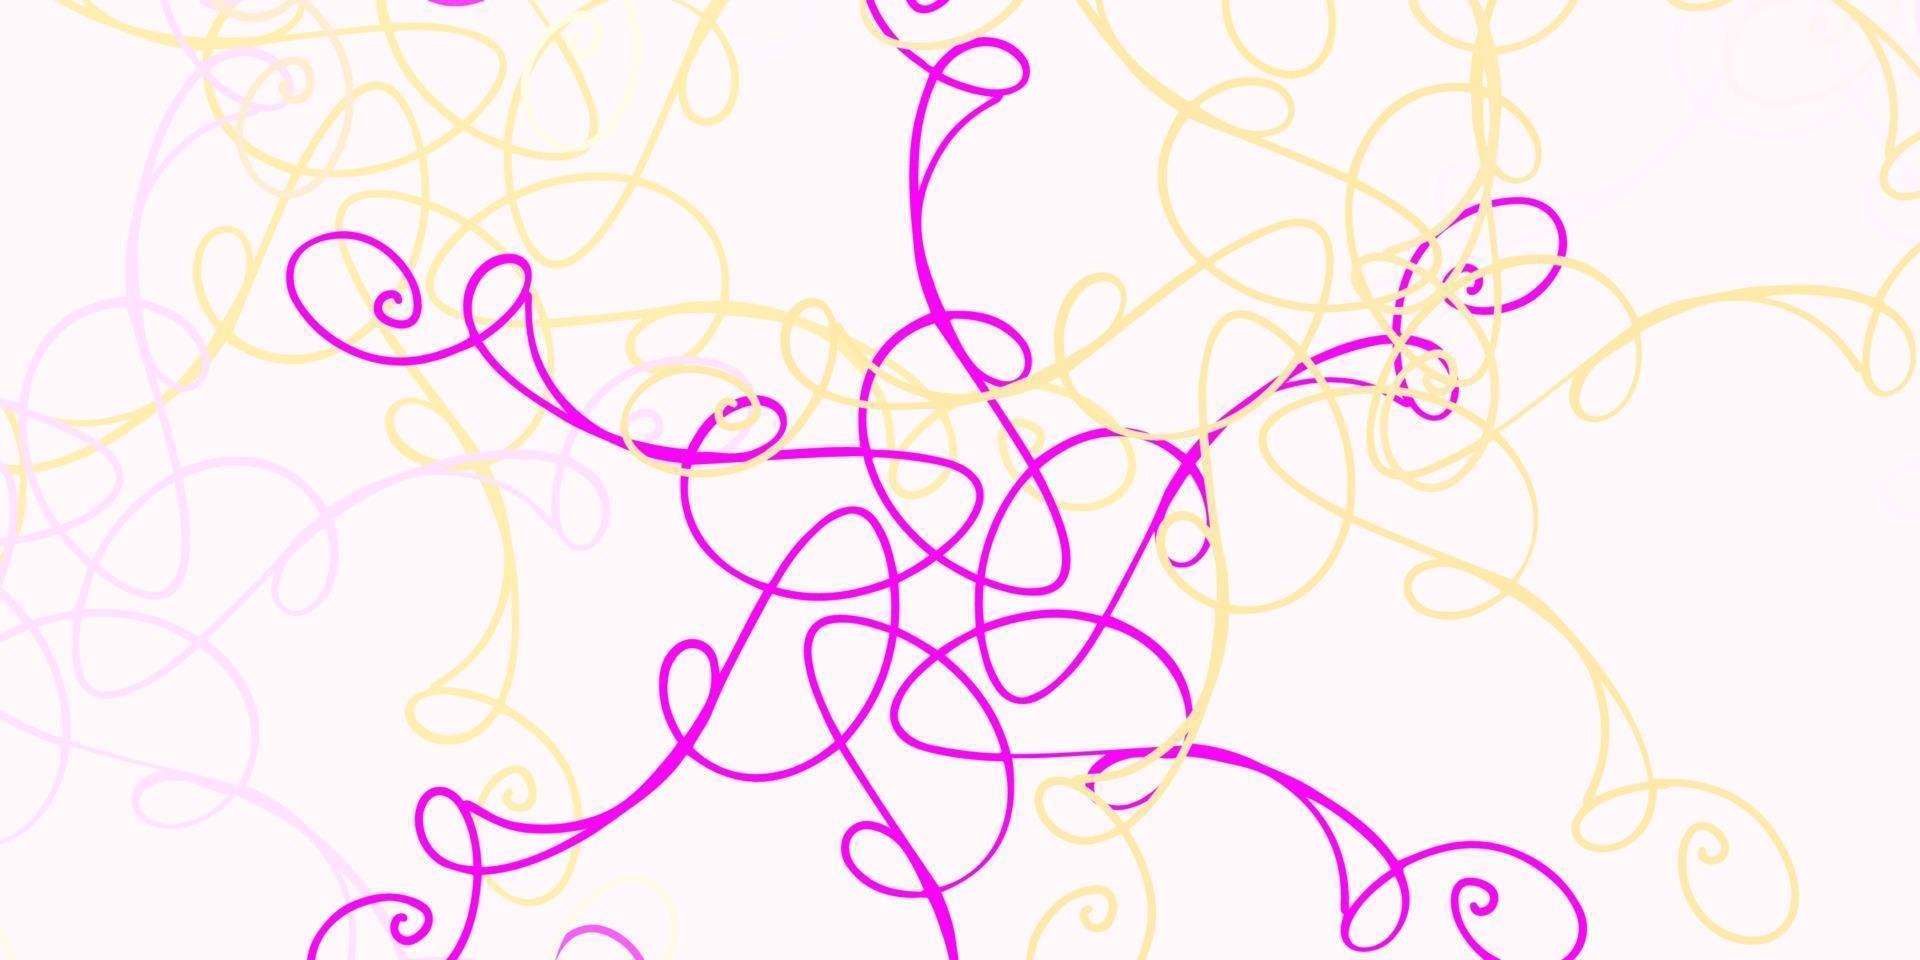 Light Pink, Yellow vector background with wry lines.